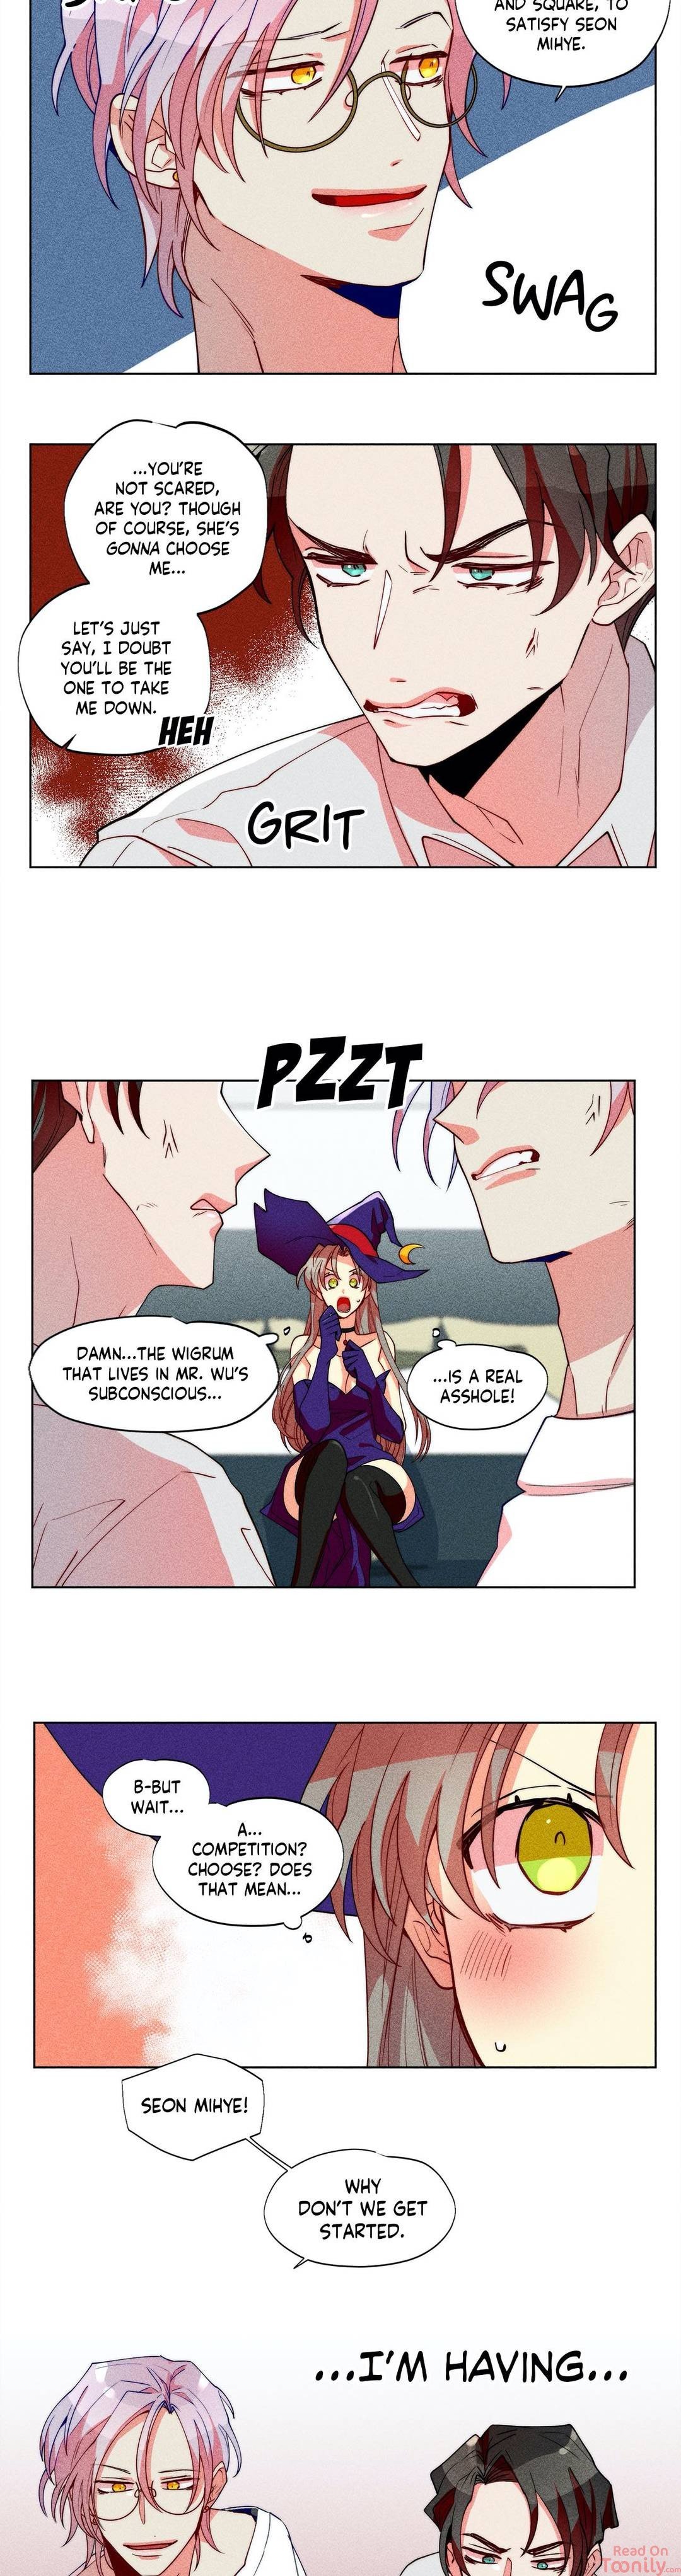 the-virgin-witch-chap-32-6